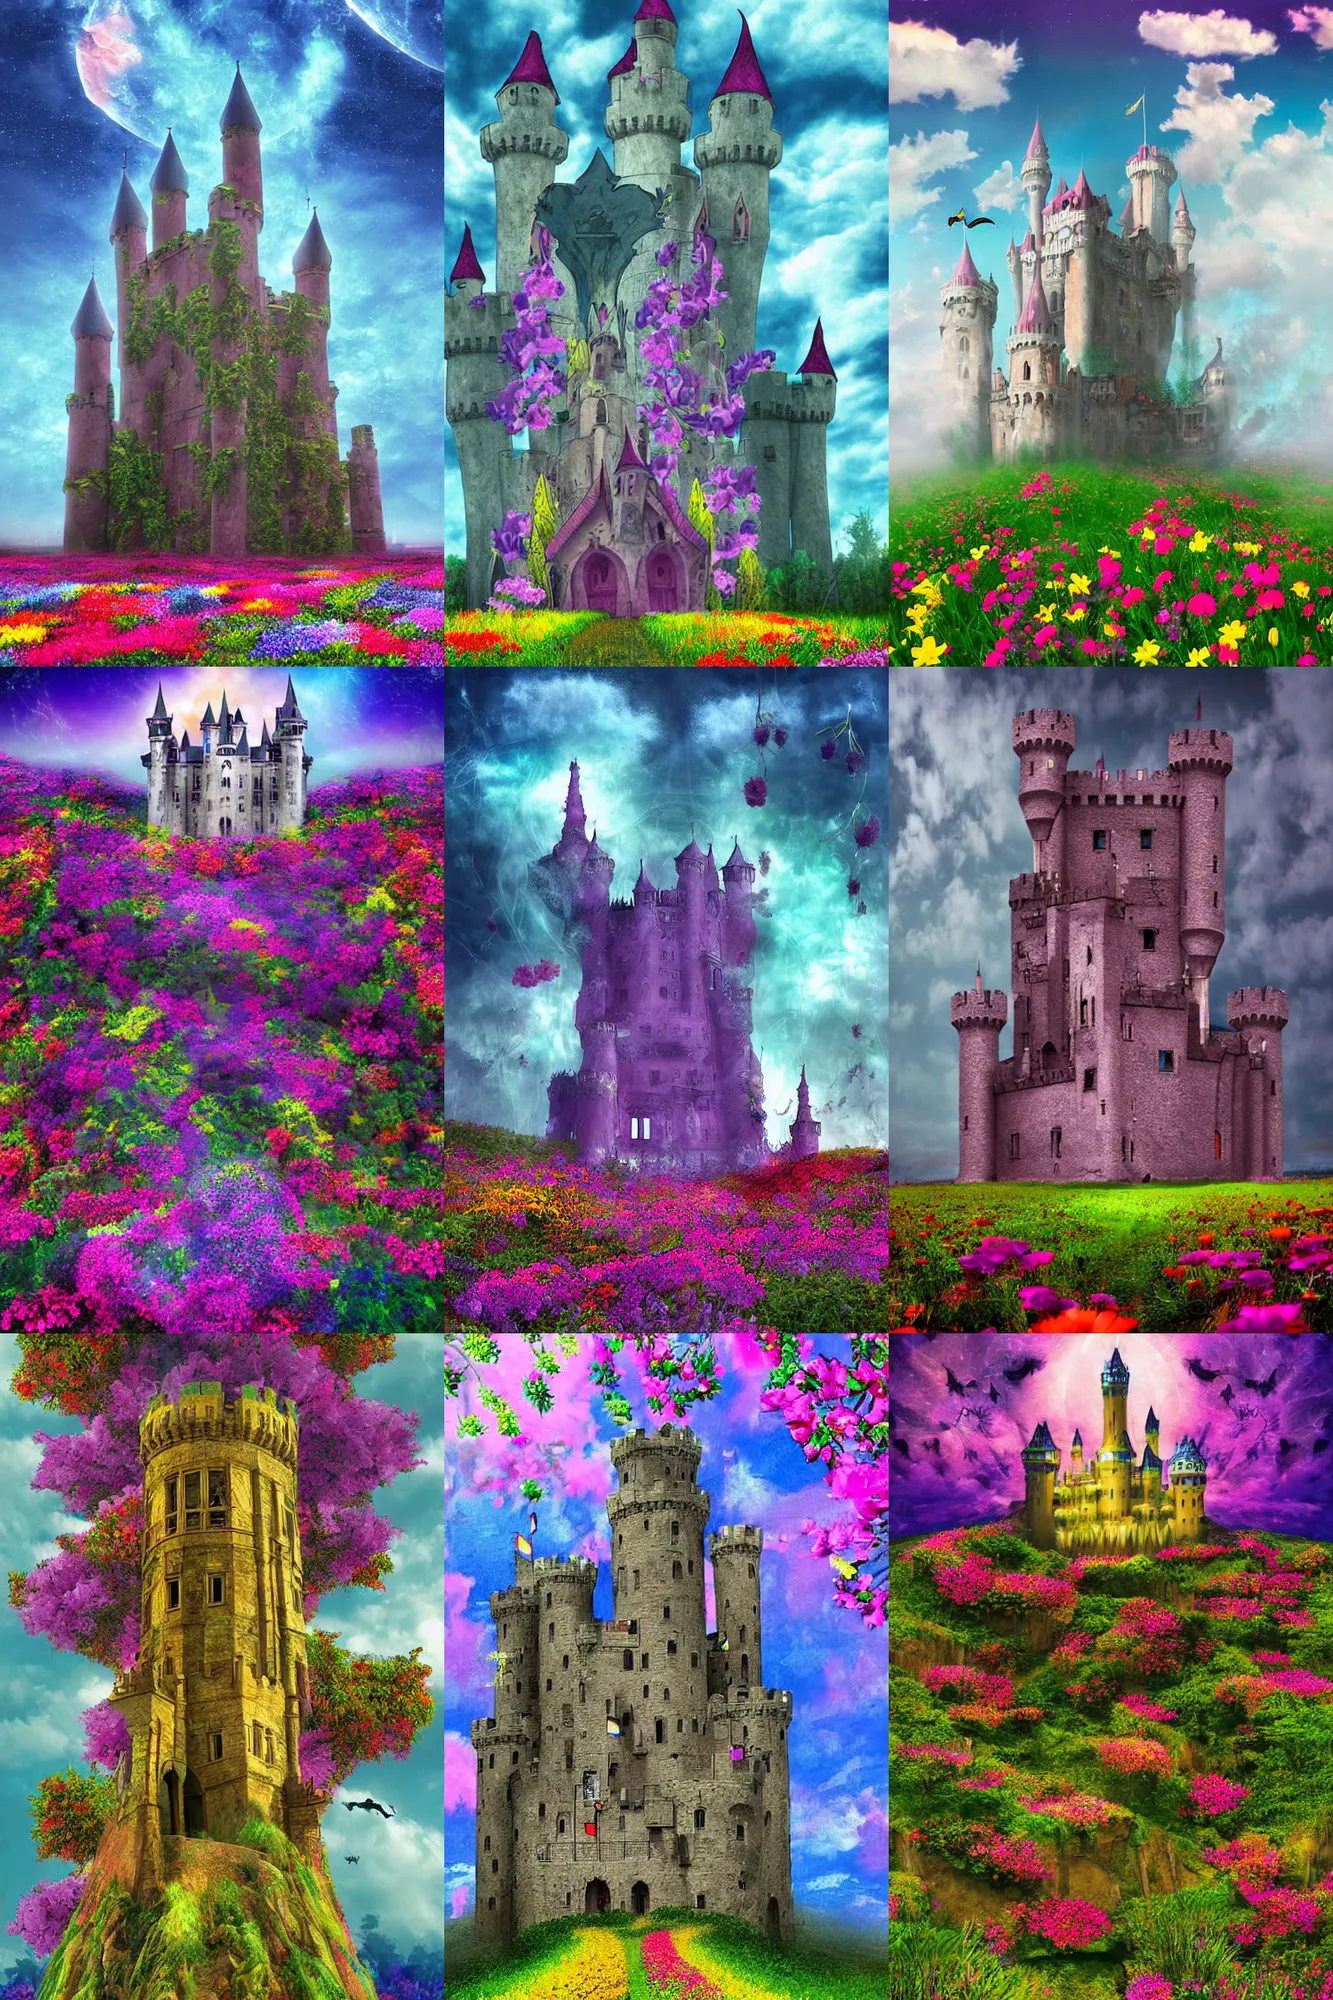 Prompt: A very phantasmagoric and ominous tall castle stands in the middle of an plain covered with colorful flowers, digital art